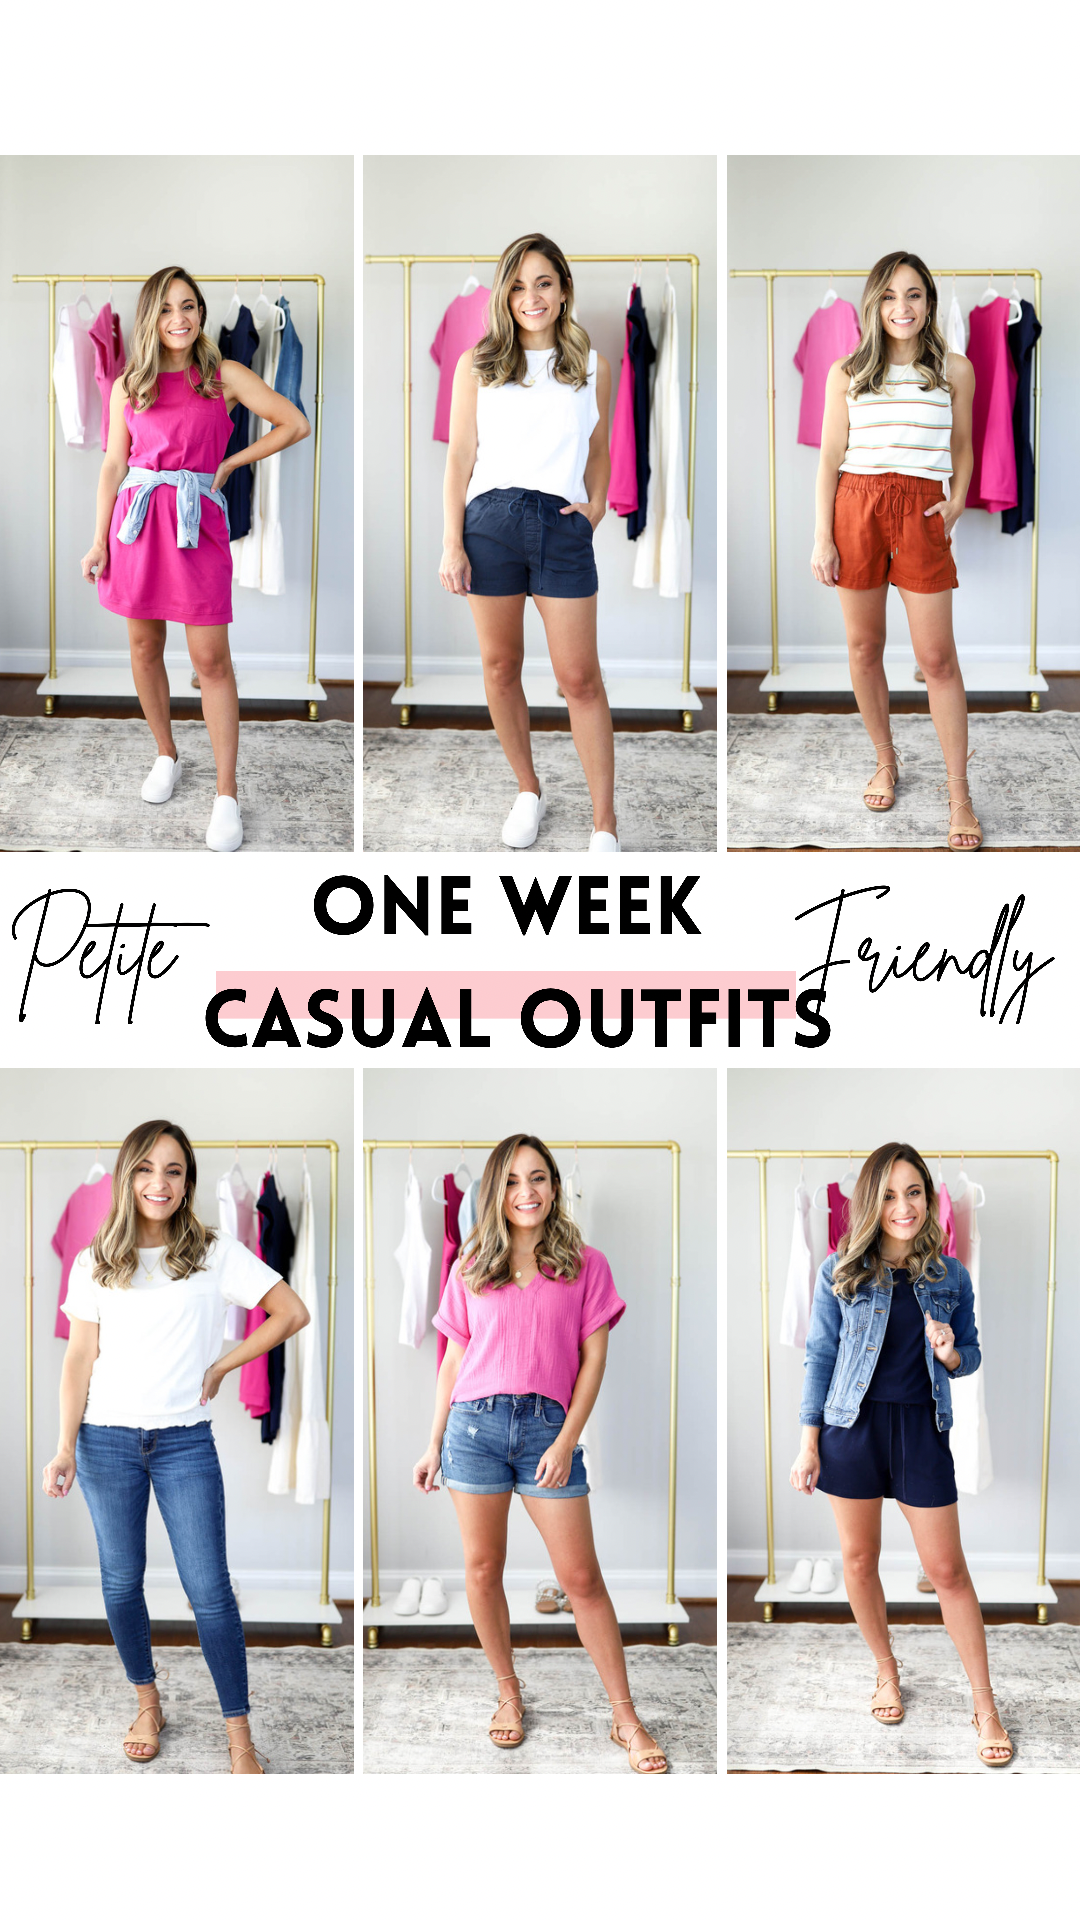 One Week of Casual Outfits - Pumps & Push Ups